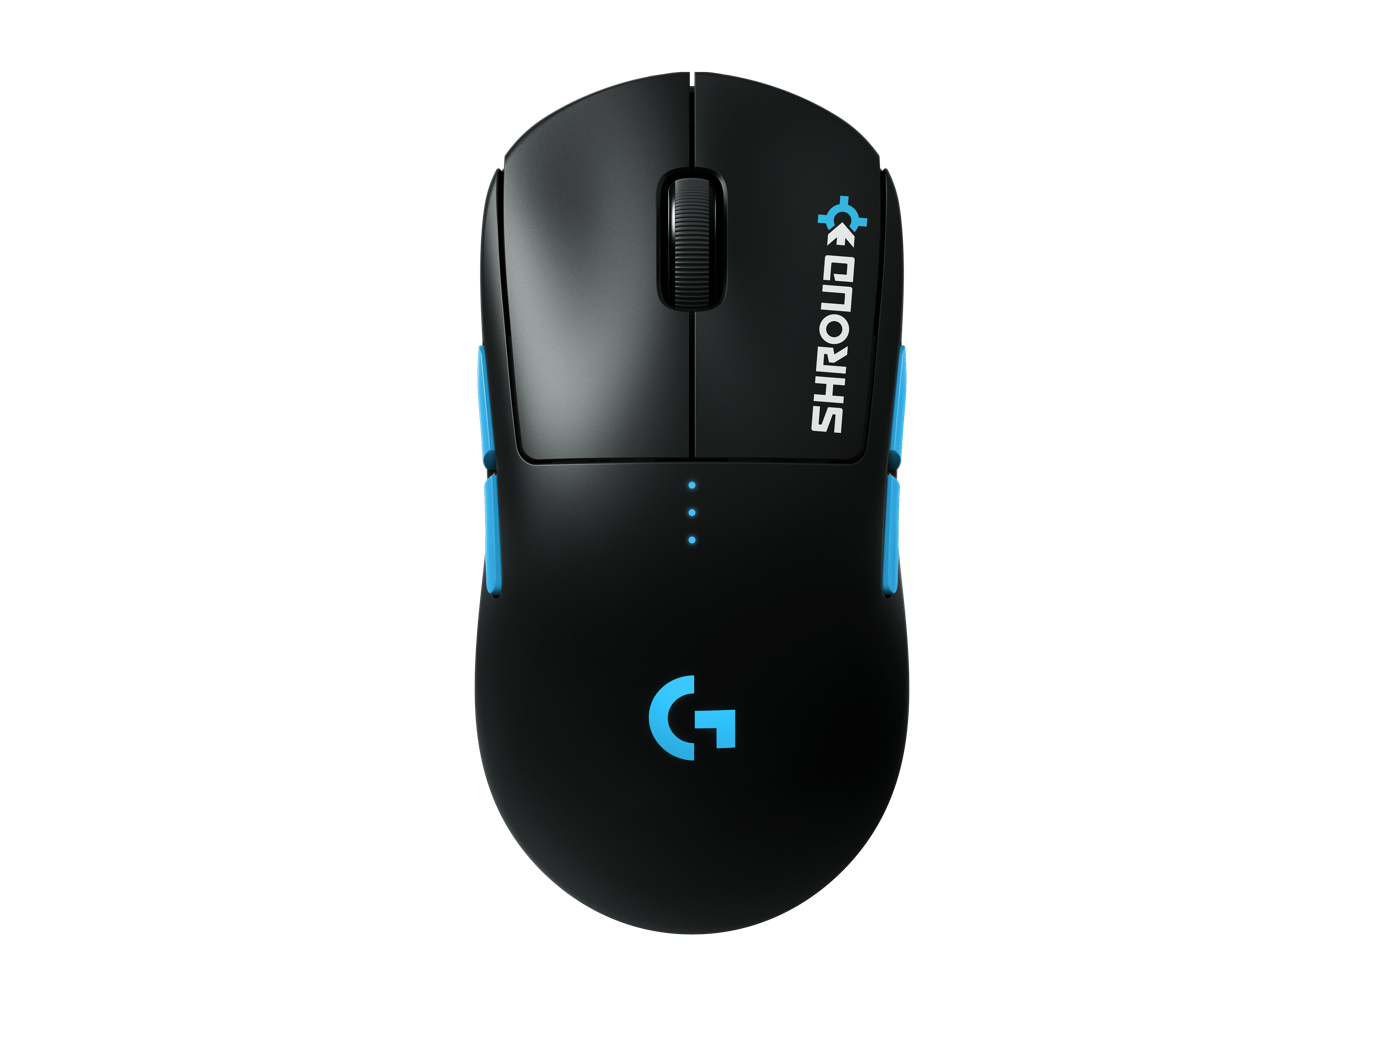 Søjle Flygtig Ewell Logitech G Pro Wireless Gaming Mouse for Esports Pros